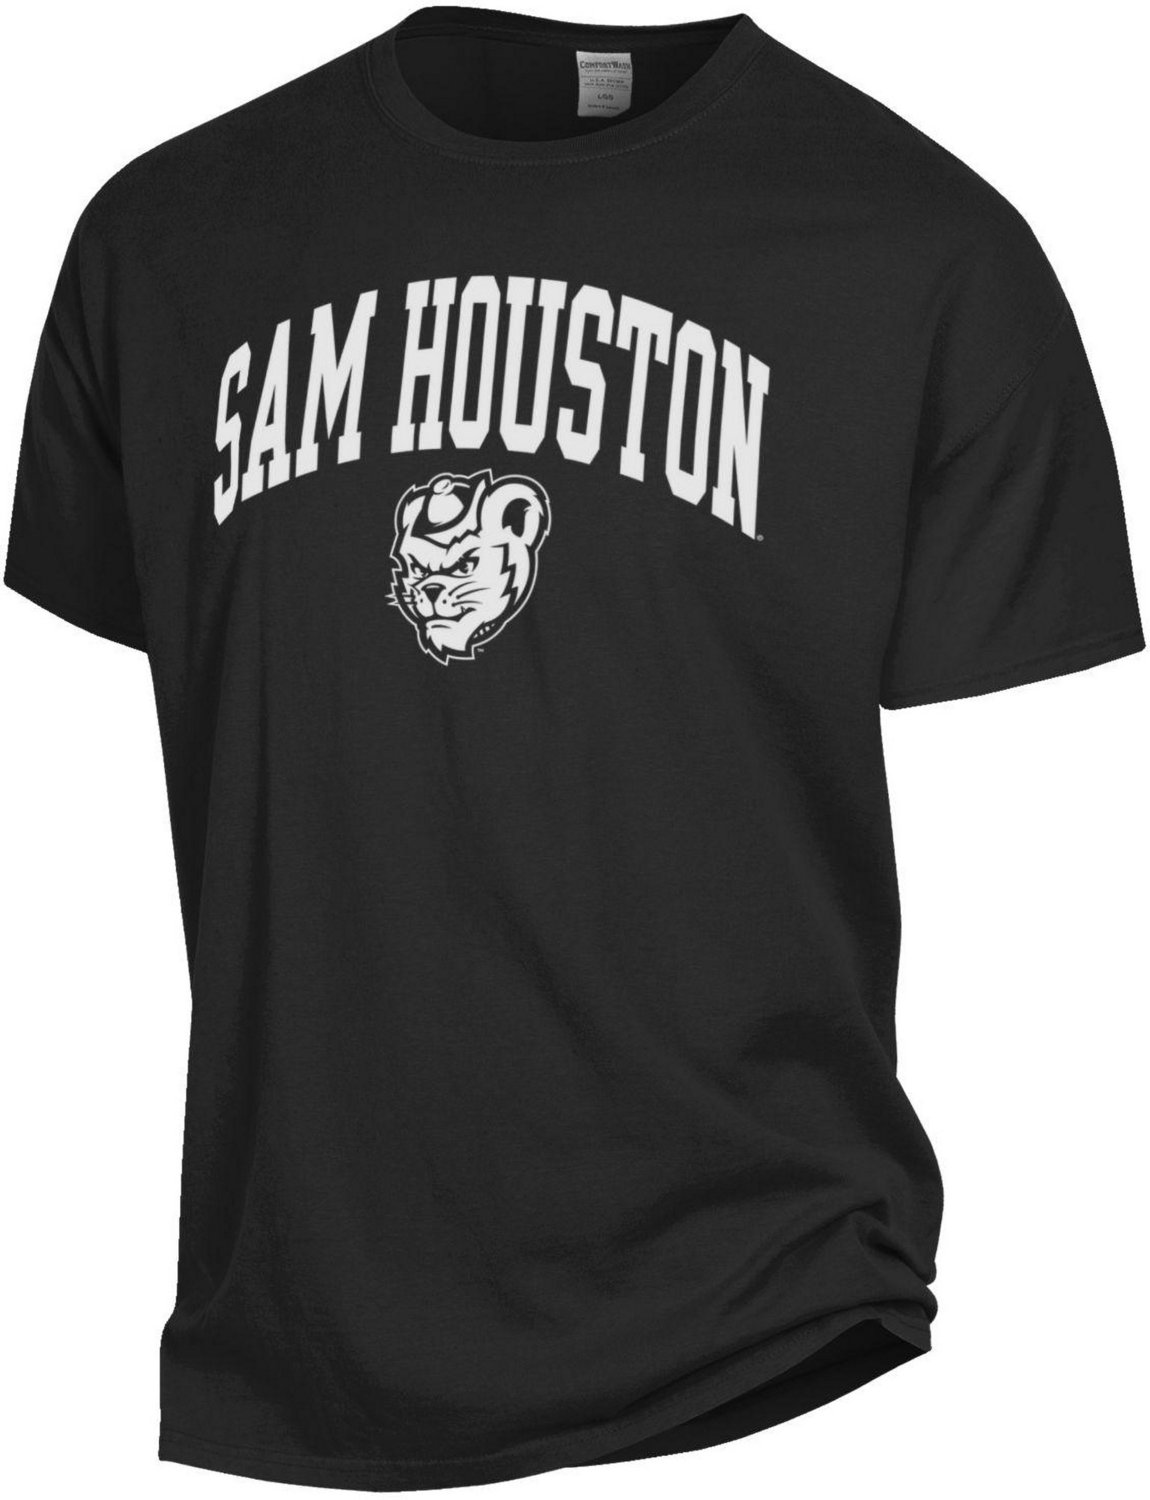 Academy Sports + Outdoors GEAR FOR SPORTS Men's Sam Houston State